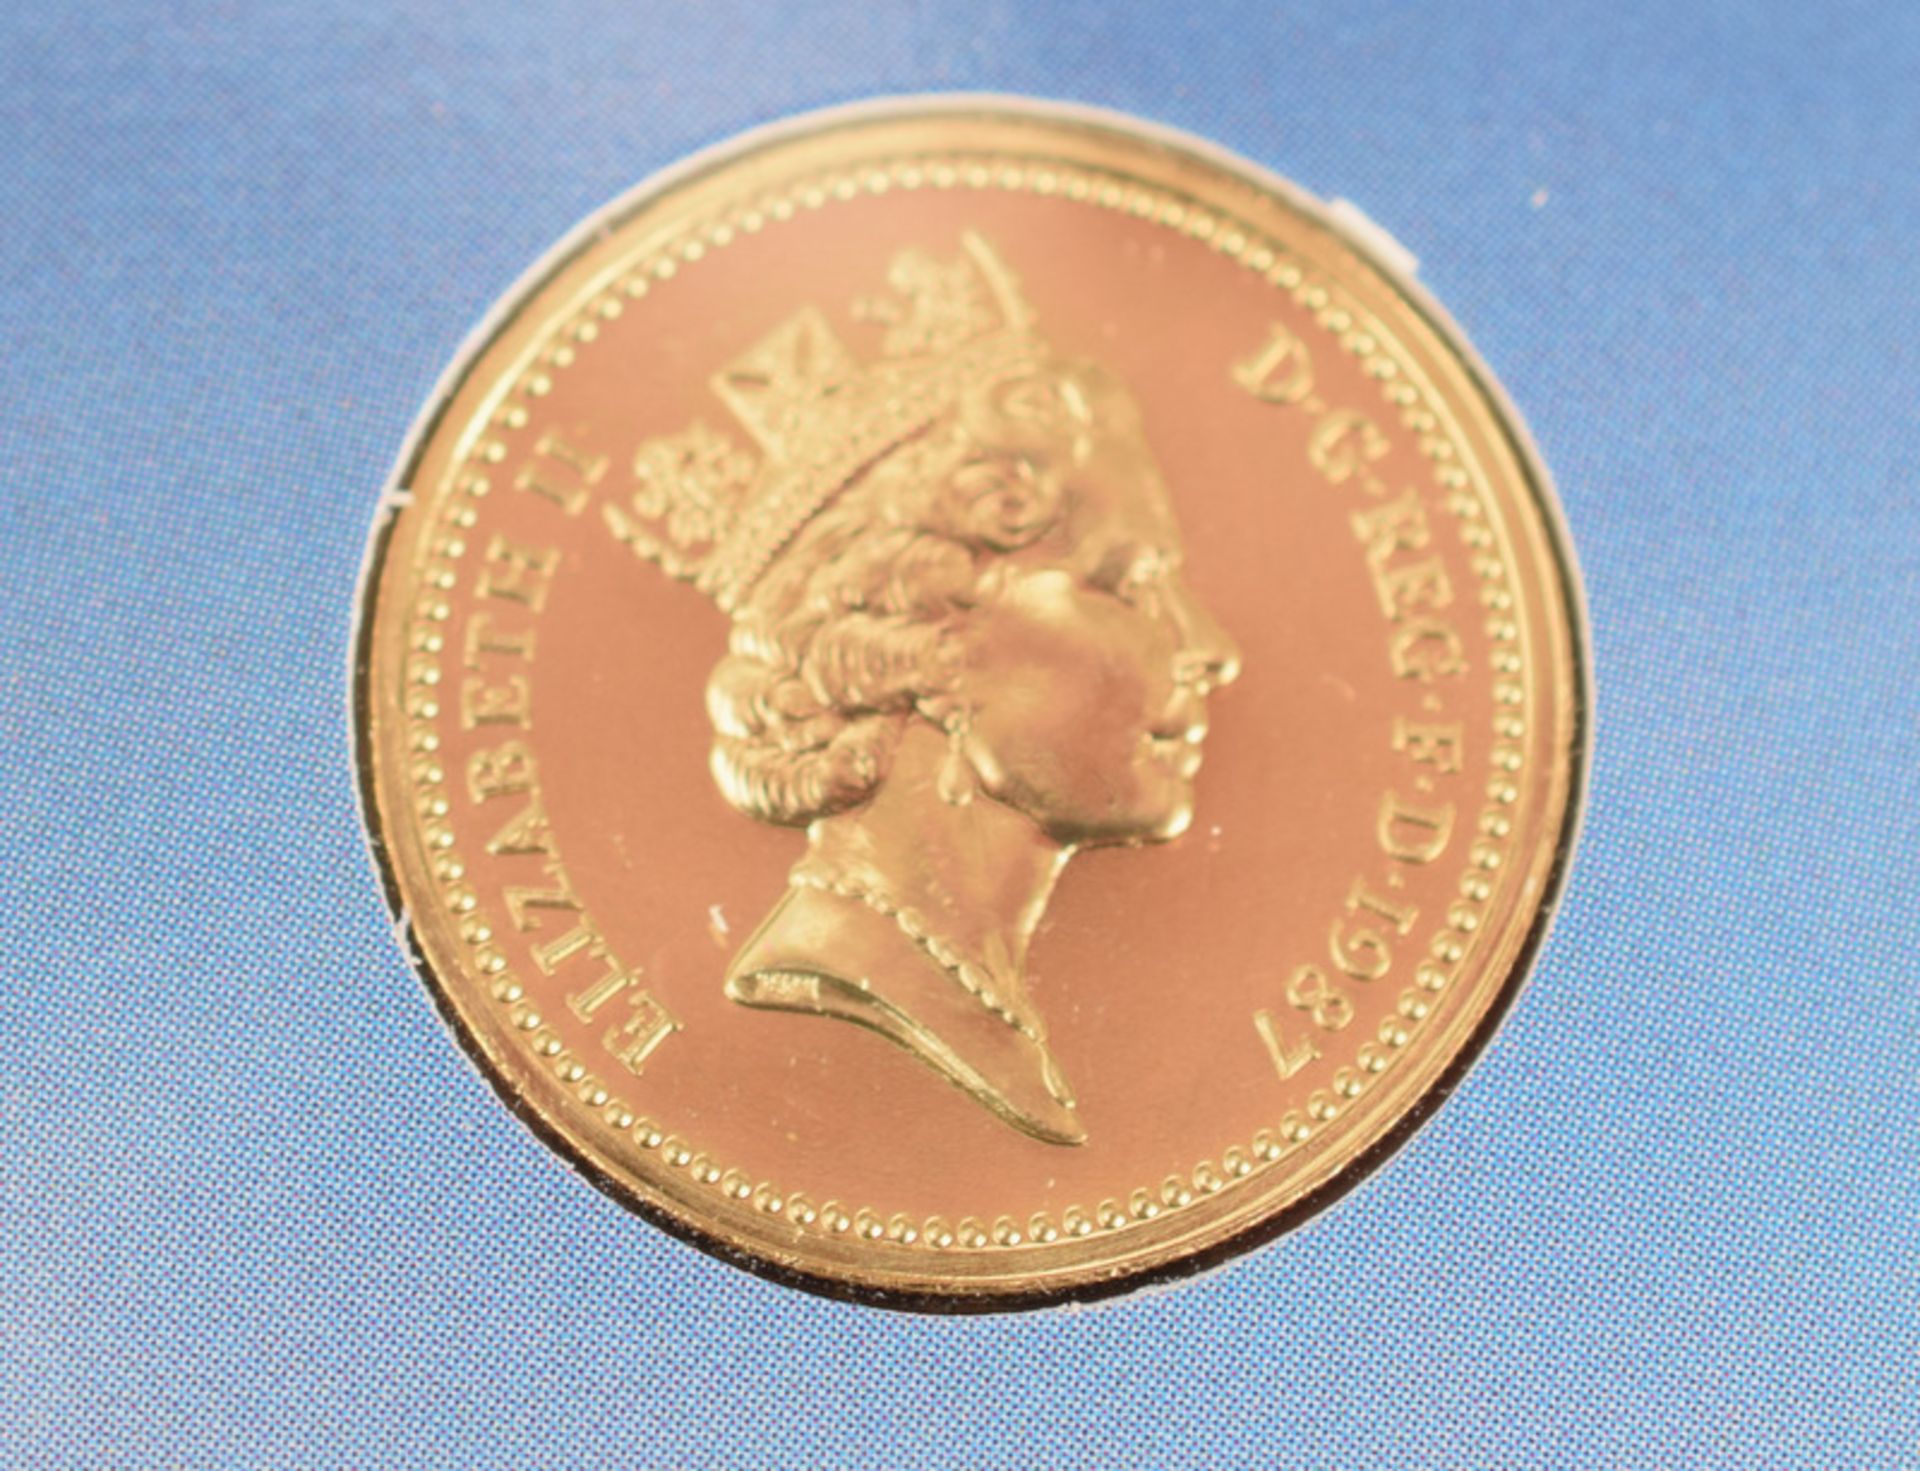 1987 Brilliant Uncirculated One Pound Coin - Image 3 of 3